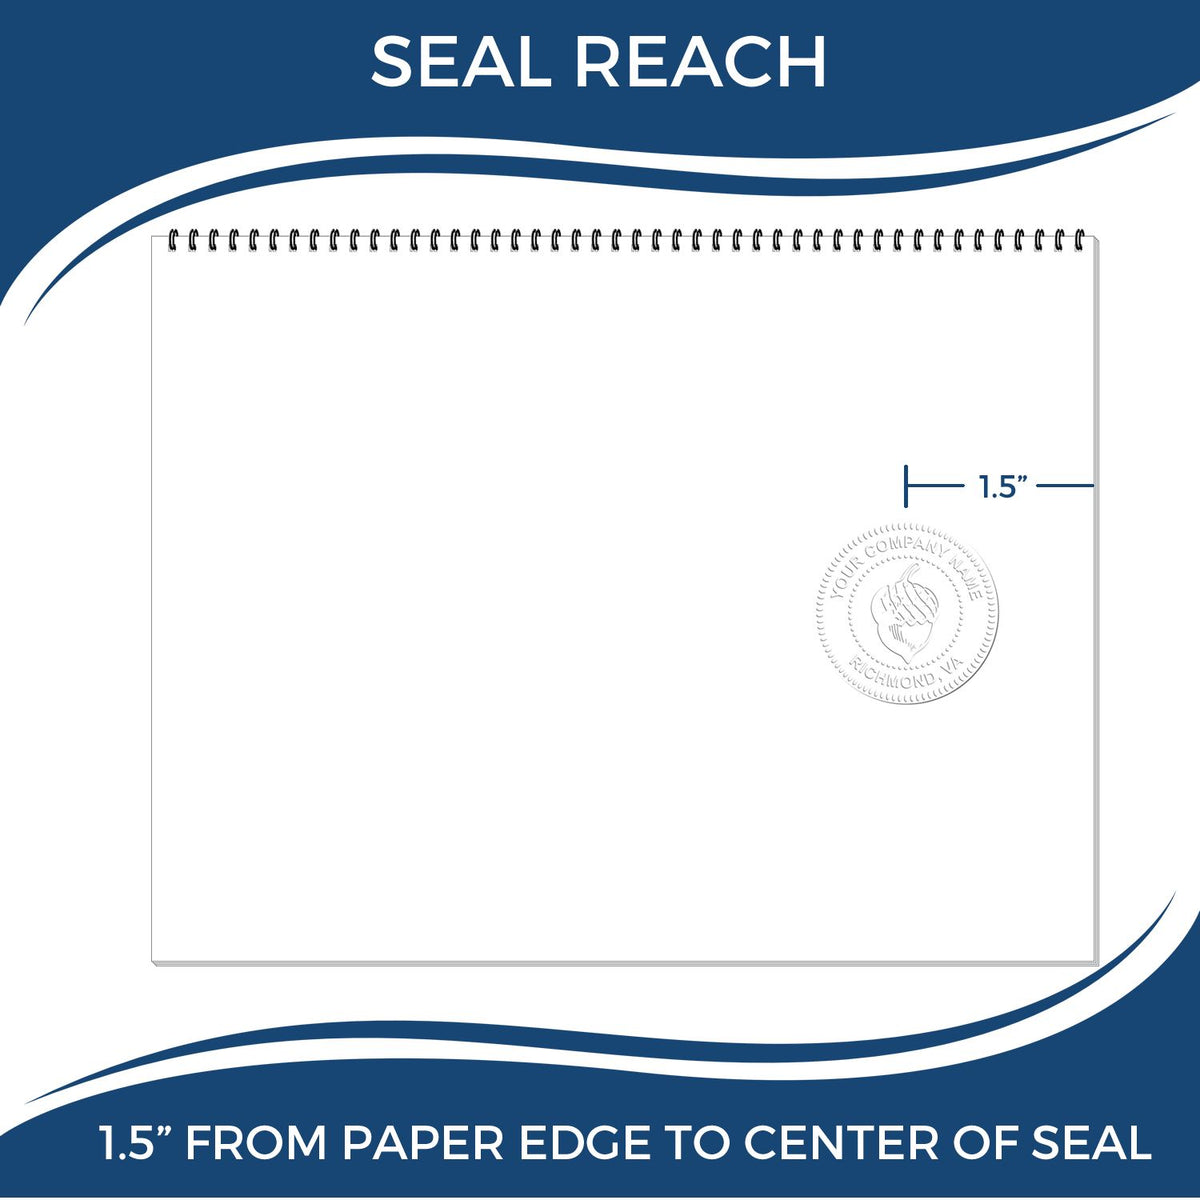 An infographic showing the seal reach which is represented by a ruler and a miniature seal image of the Hybrid Indiana Land Surveyor Seal